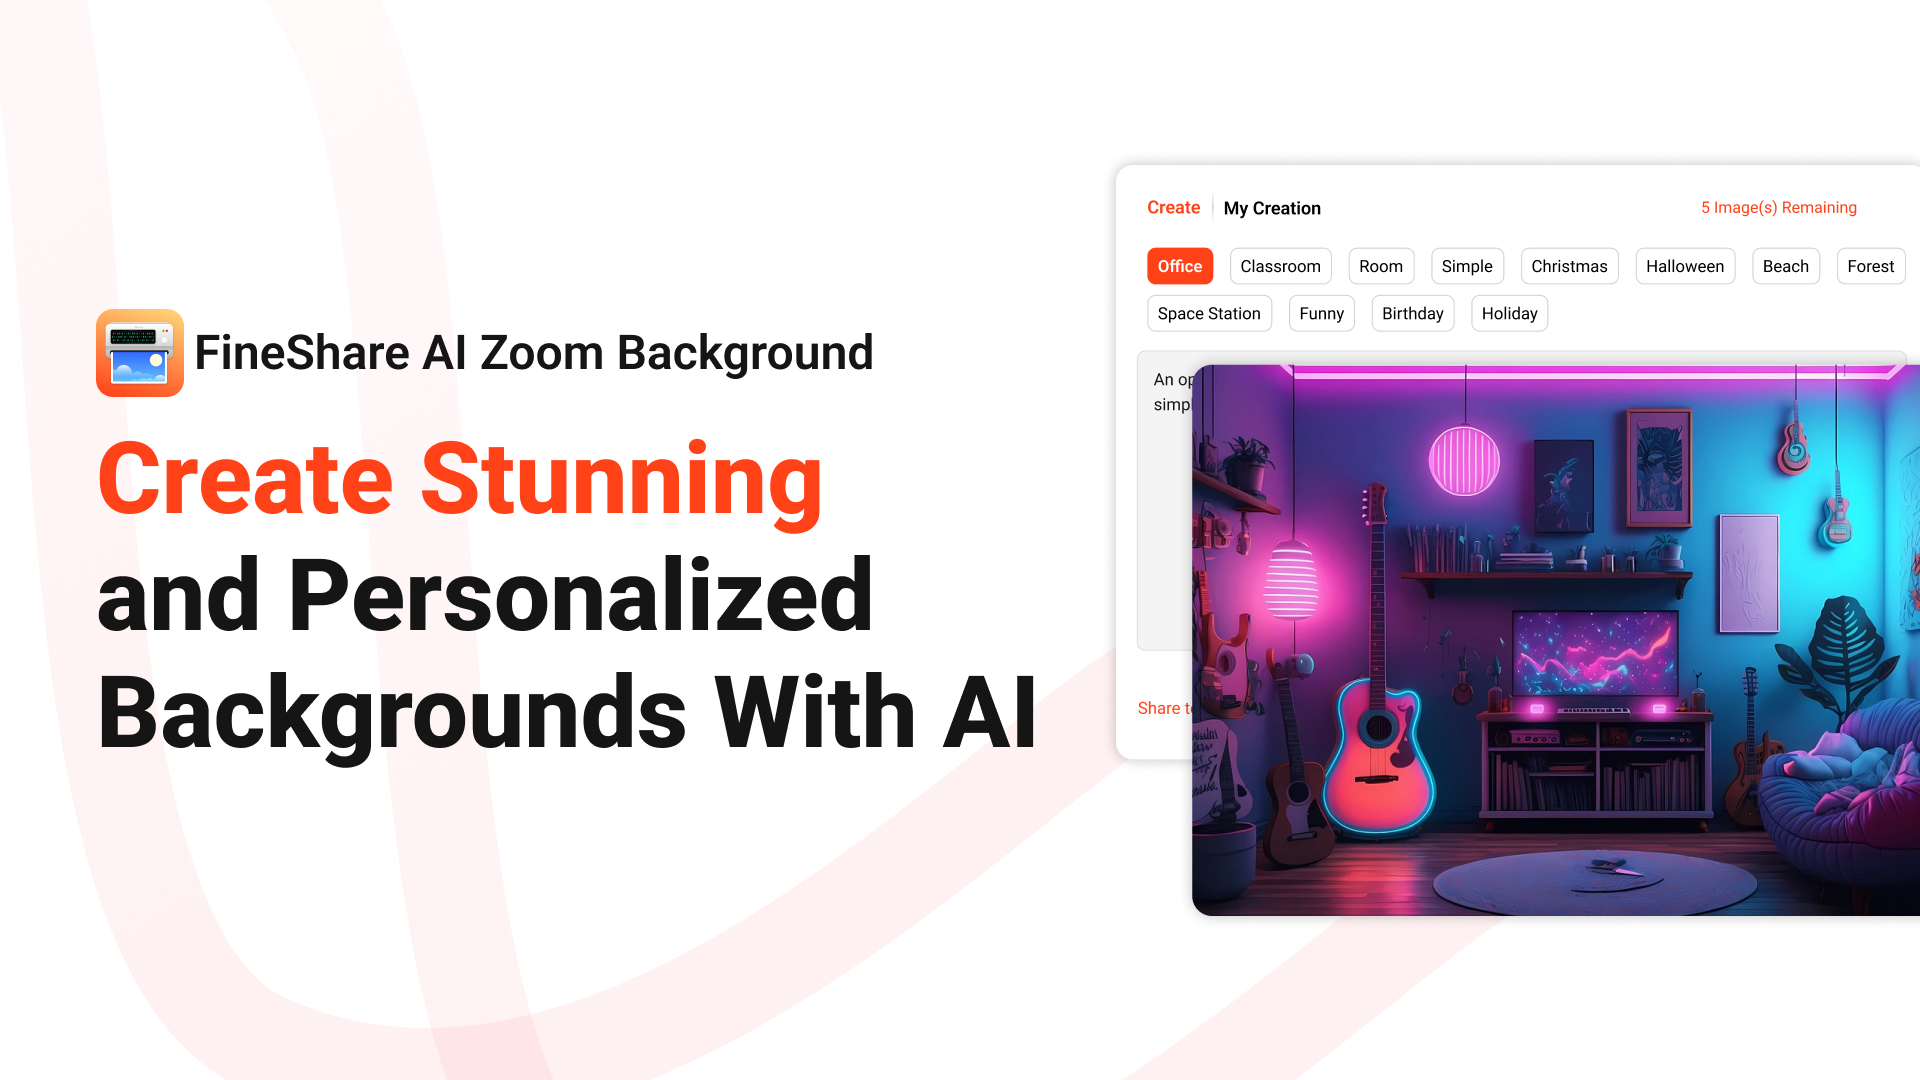 FineShare AI Zoom Background Landing page